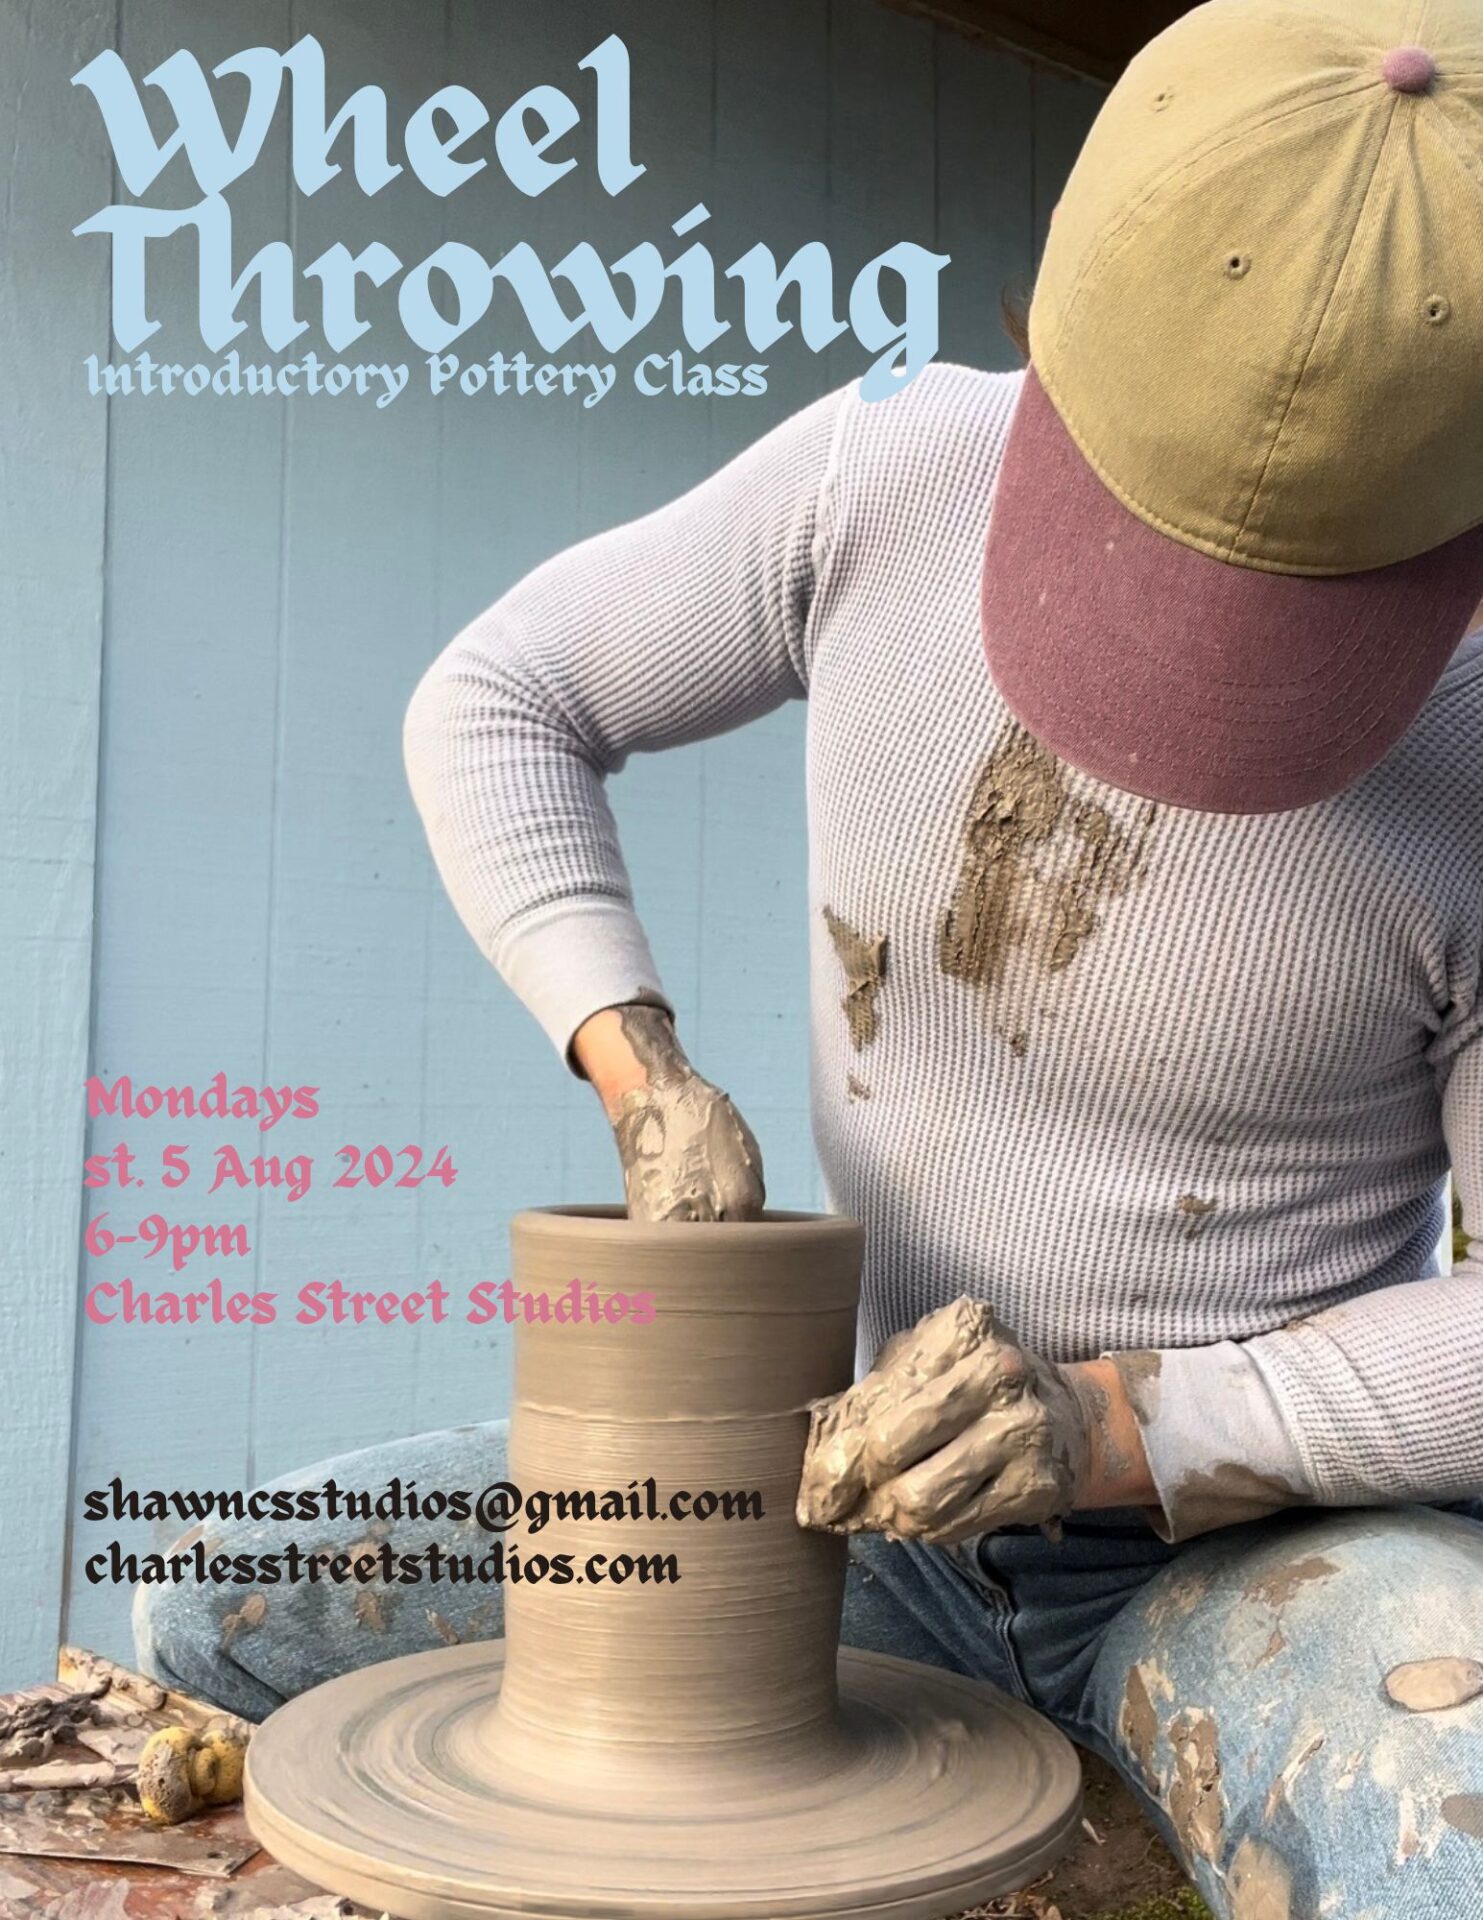 Flyer for the annual Charles Street Studios Spring Pottery show April 27-28, 2024